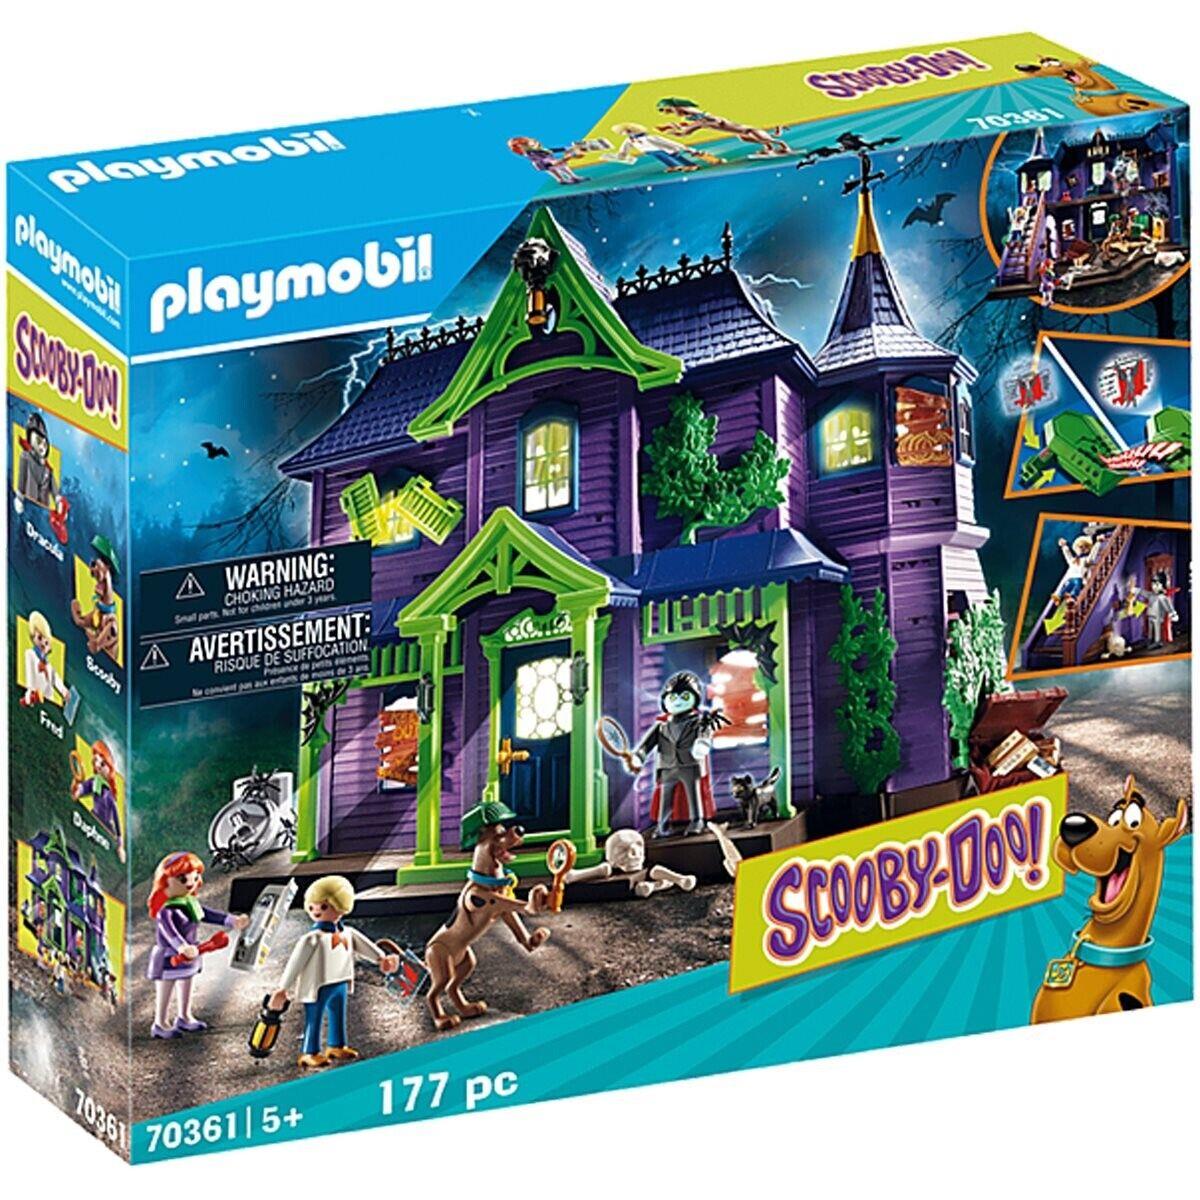 Playmobil Scooby-doo Adventure in The Mystery Mansion Set 70361